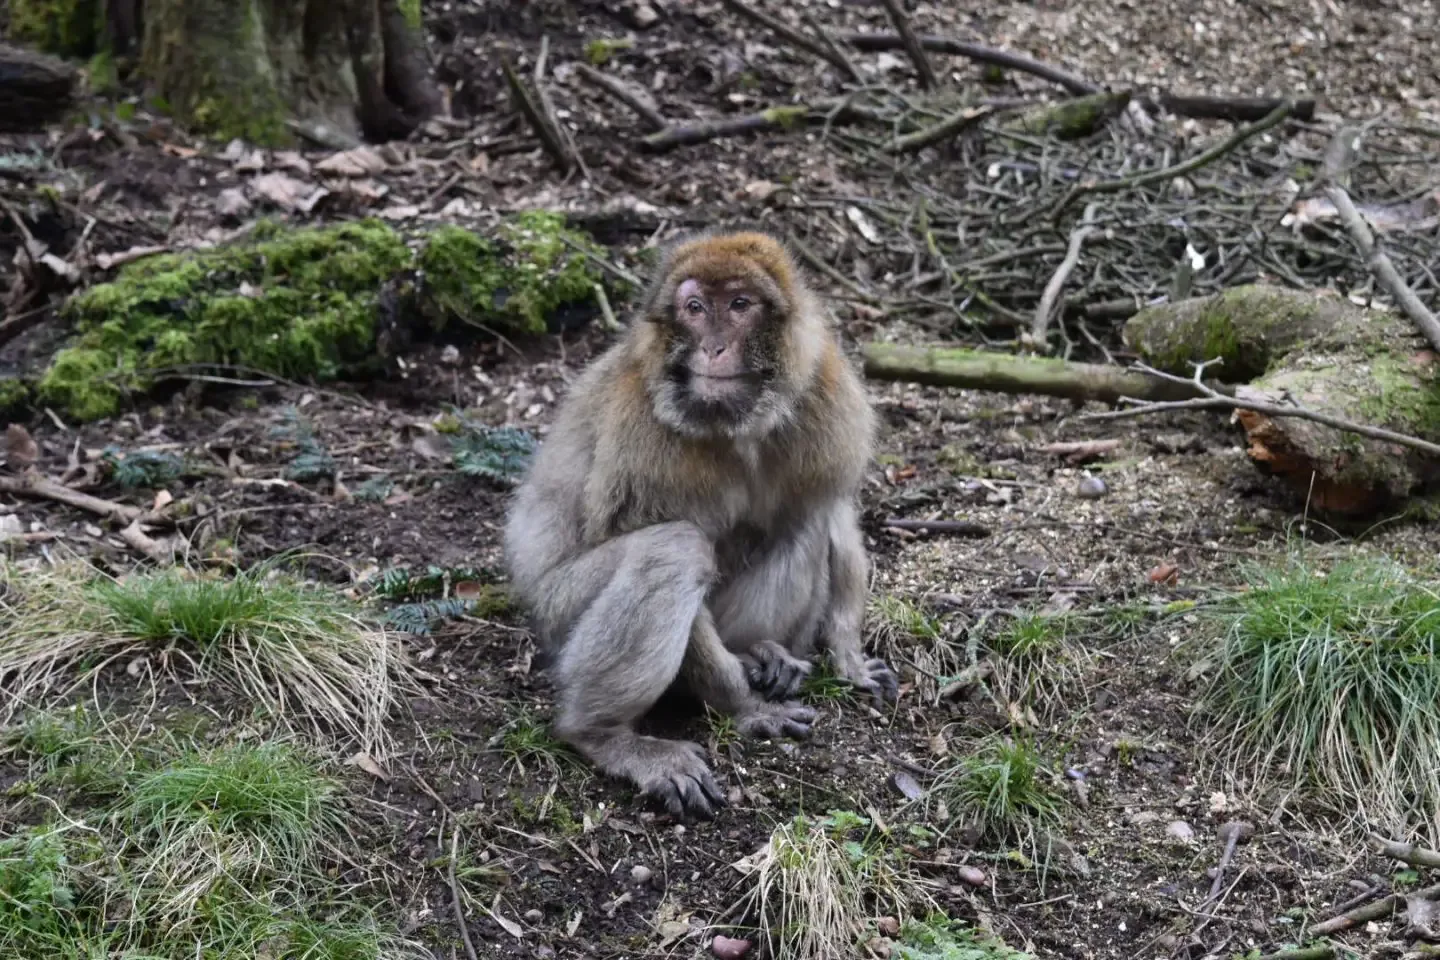 Trentham Monkey Forest review in Staffordshire 